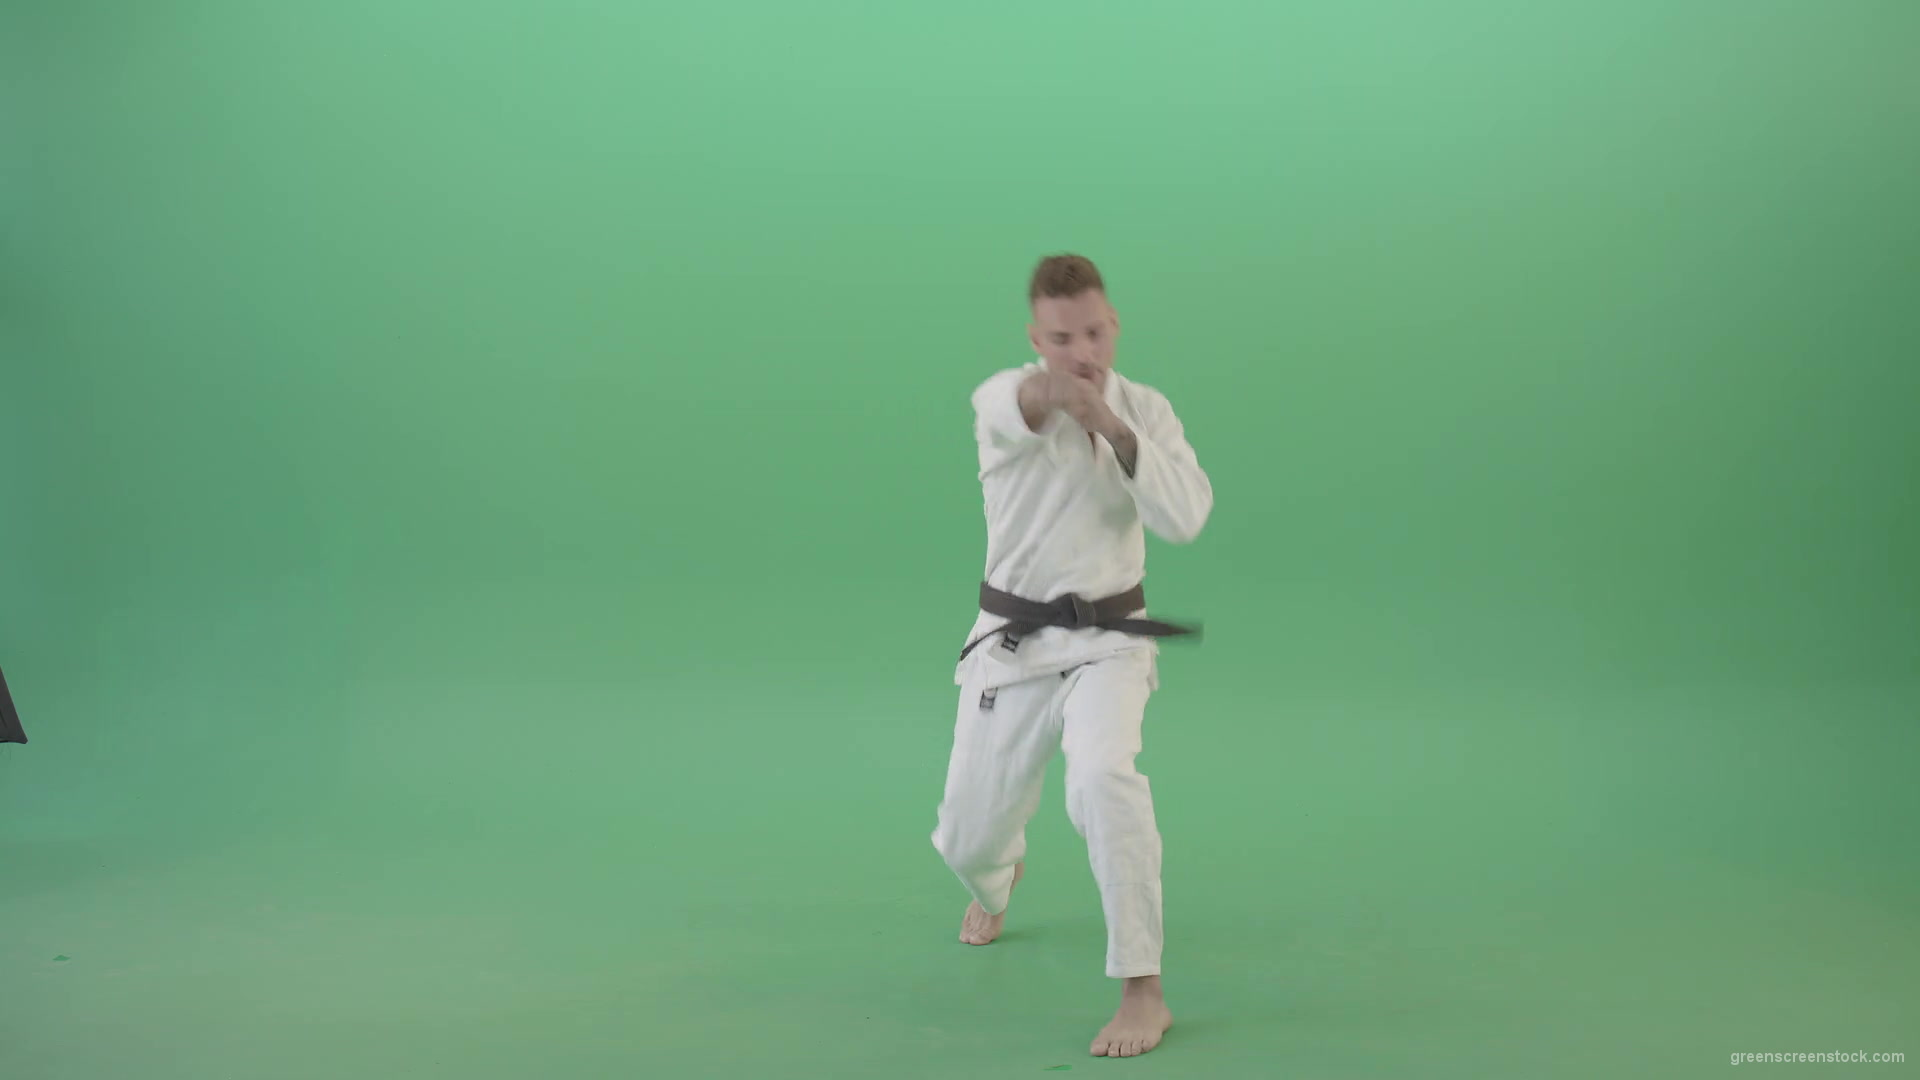 Jujutsu-Sportman-make-front-kick-and-punch-isolated-on-green-screen-4K-Video-Footage-1920_002 Green Screen Stock